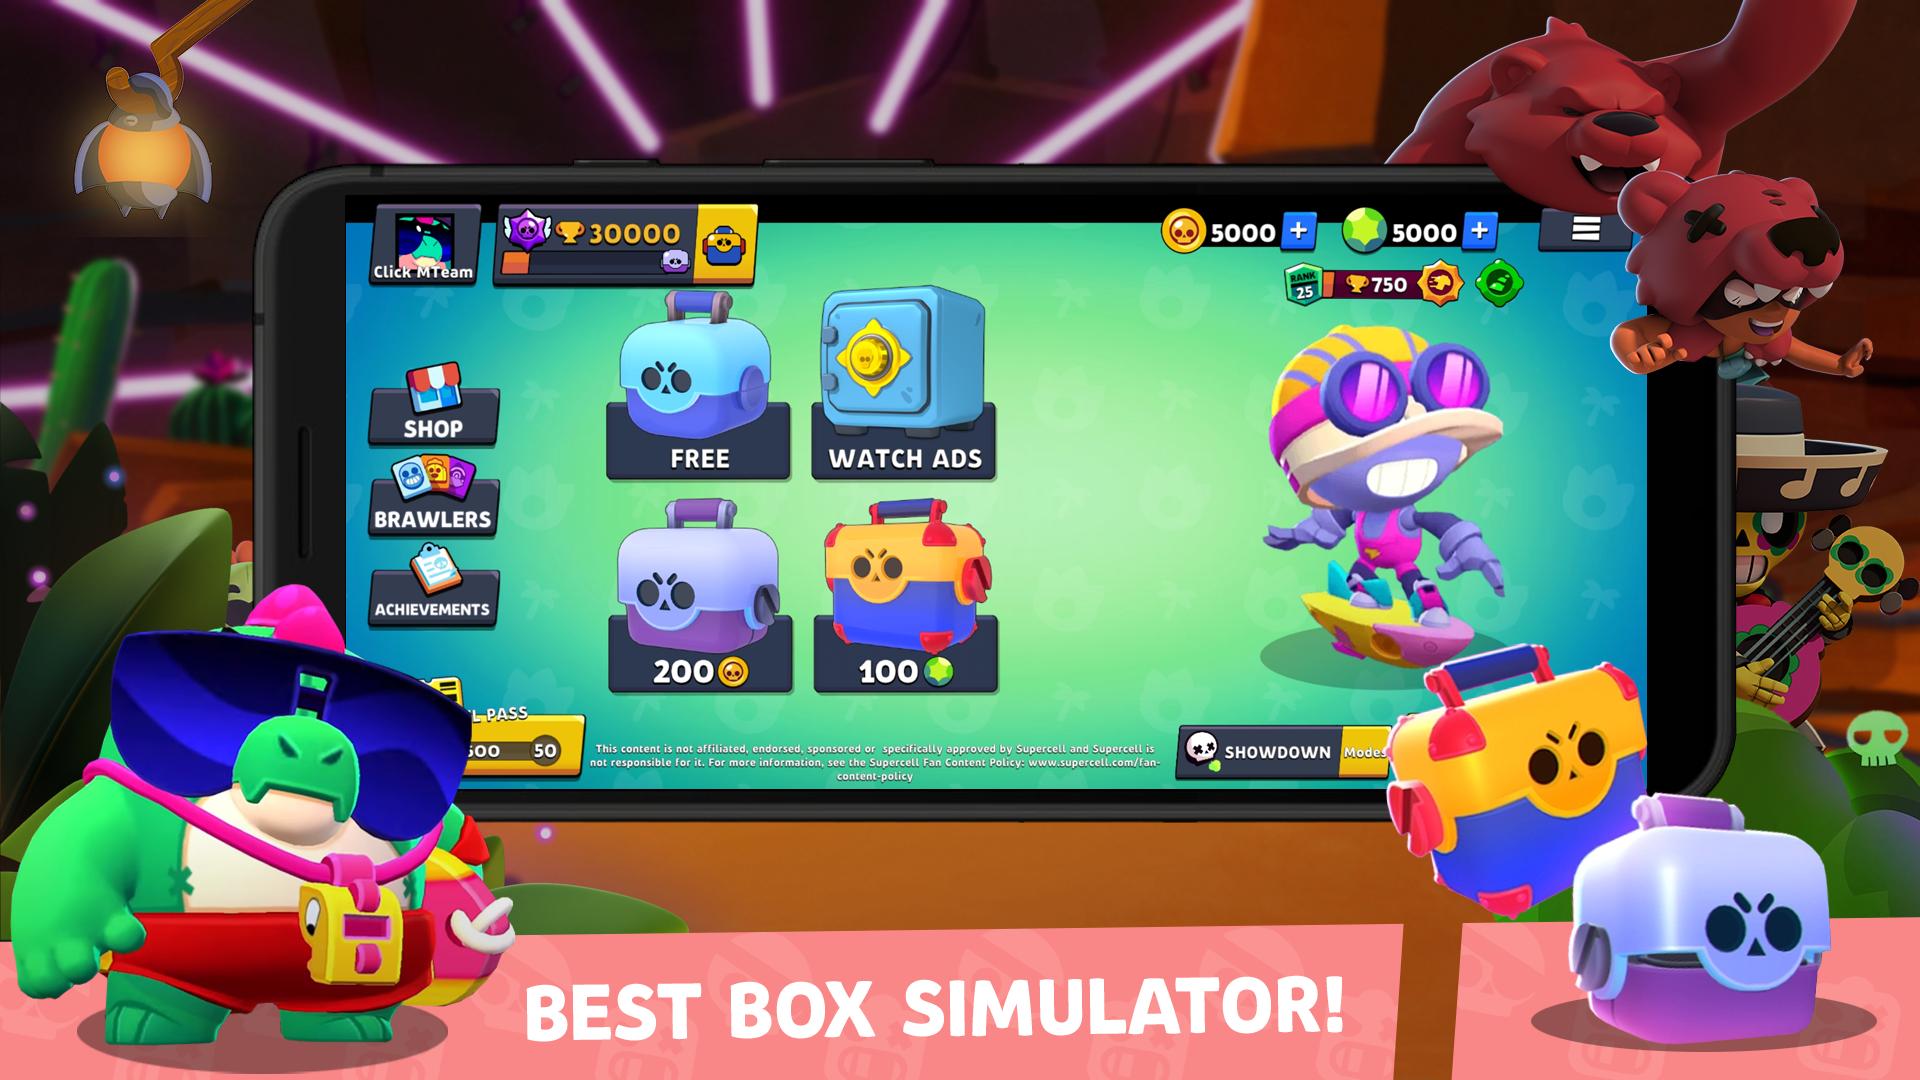 Splash Box Simulator For Brawl Stars Cool Boxes For Android Apk Download - brawl stars apk for android 4.2